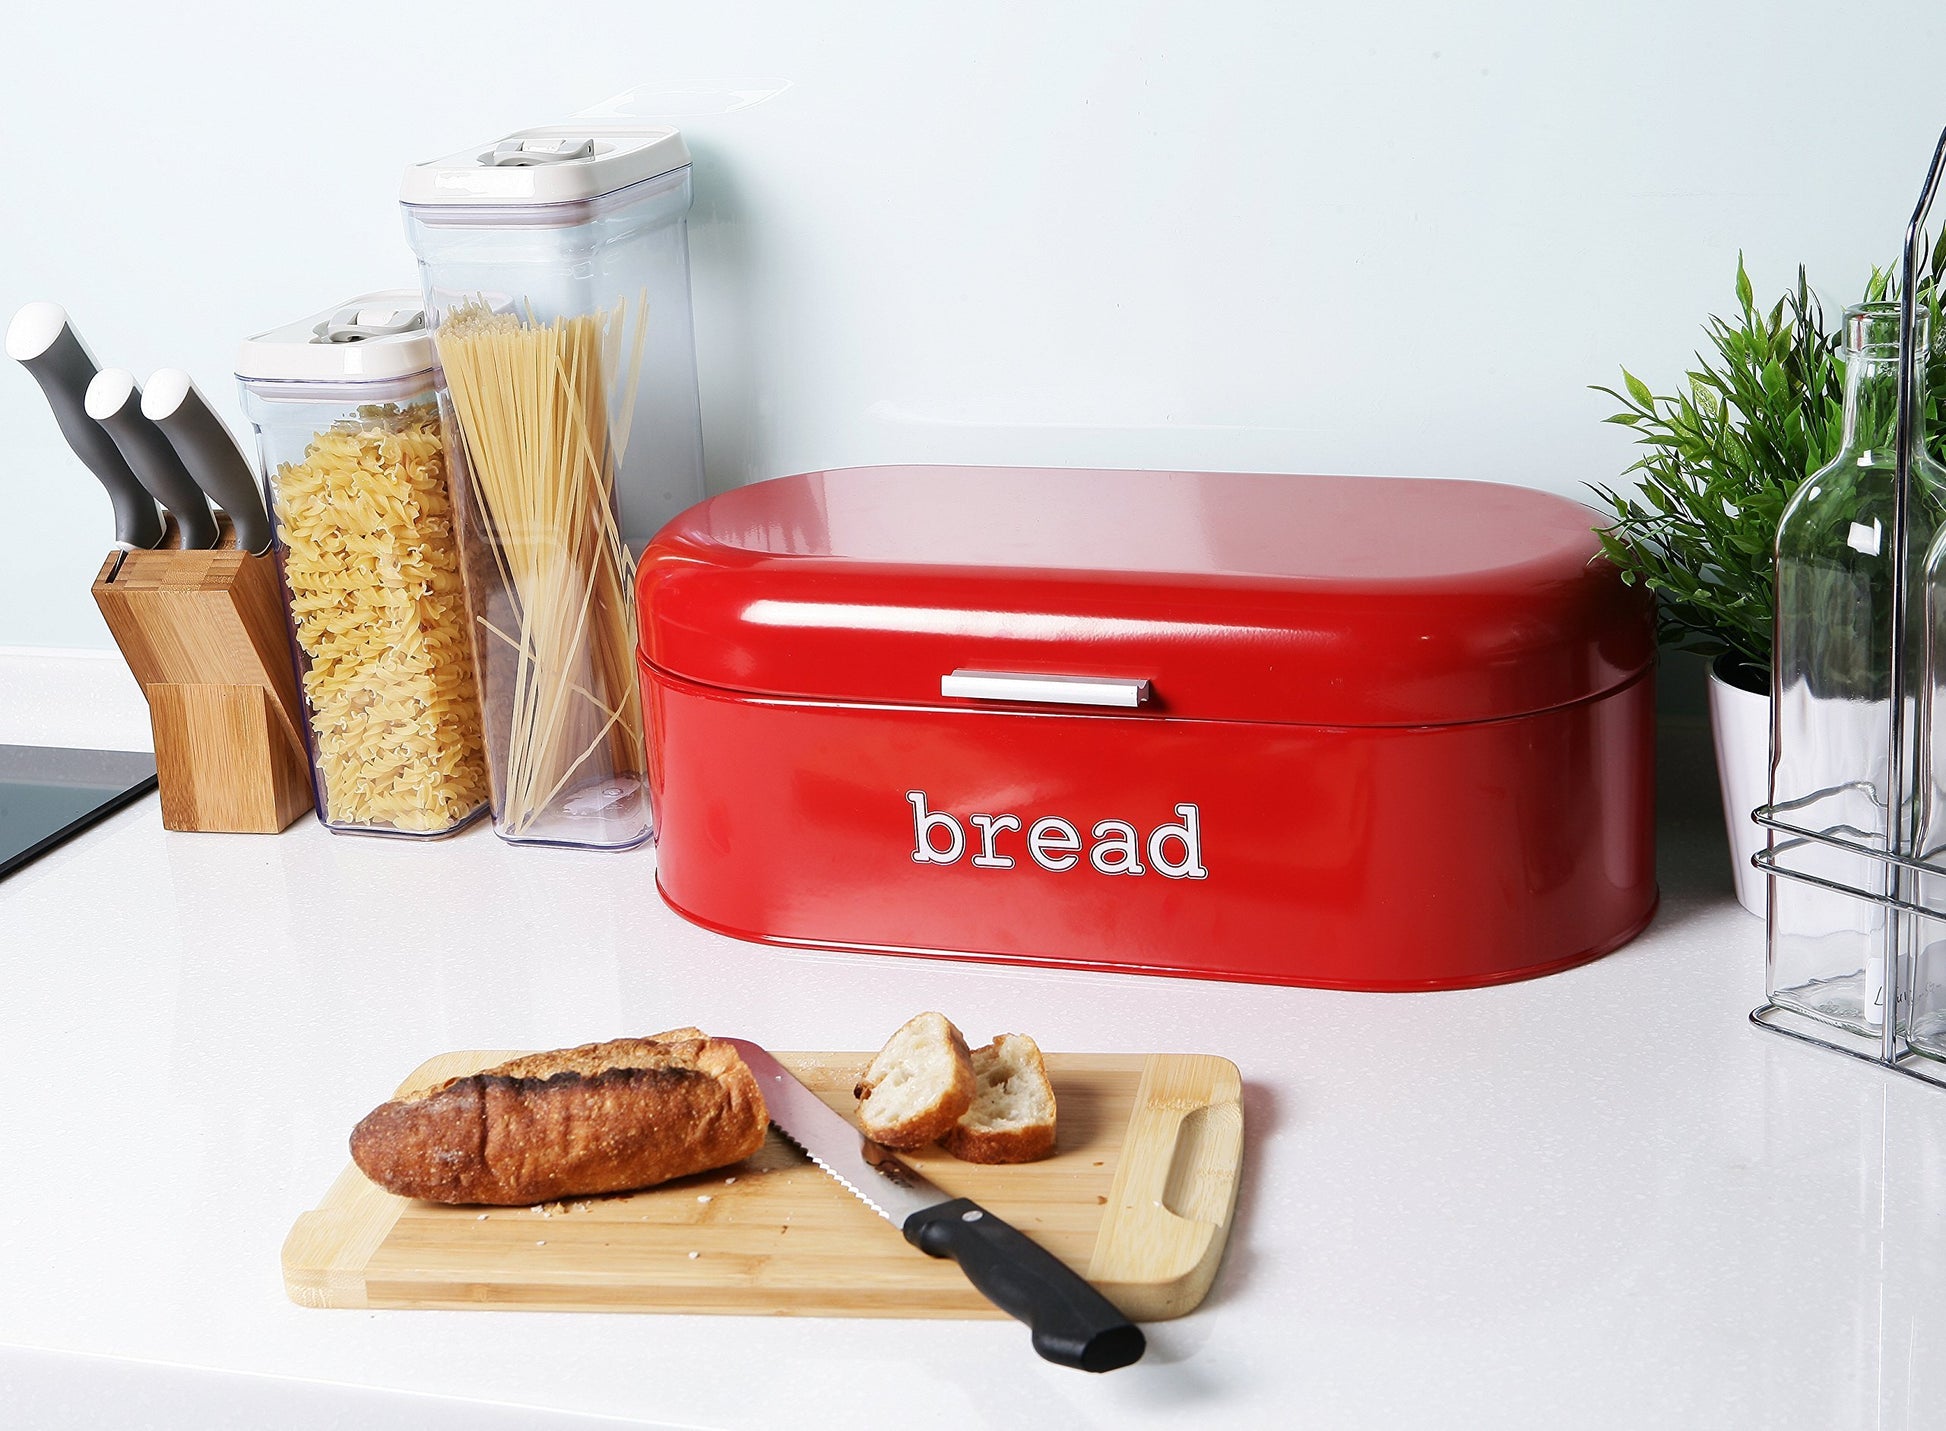 Great large bread box for kitchen counter bread bin storage container with lid metal vintage retro design for loaves sliced bread pastries red 17 x 9 x 6 inches